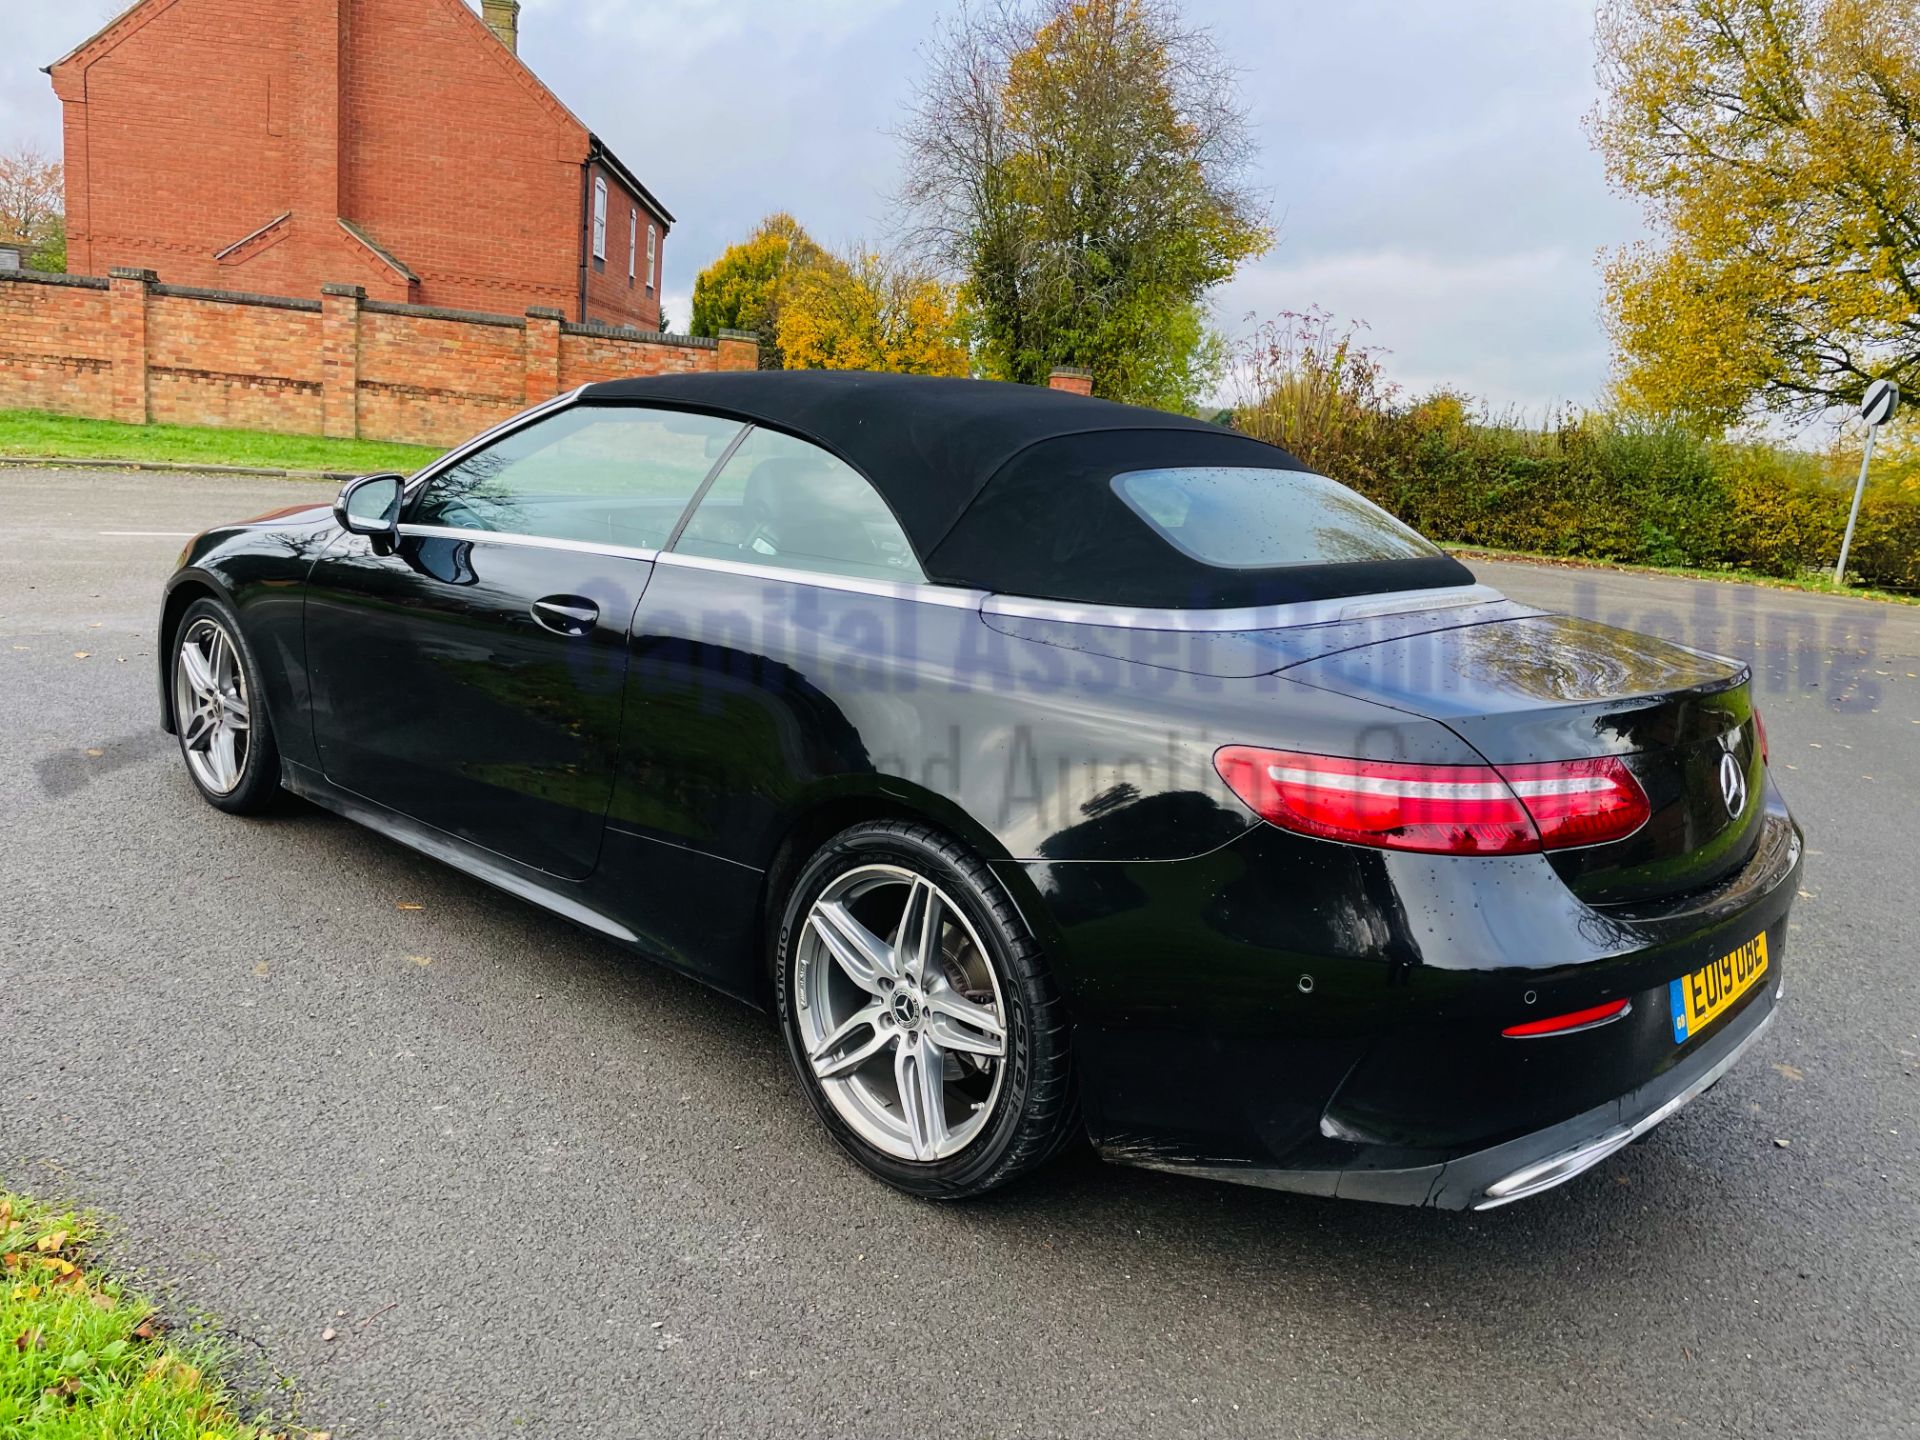 MERCEDES-BENZ E220d *AMG LINE - CABRIOLET* (2019 - EURO 6) '9G TRONIC AUTO - SAT NAV' *FULLY LOADED* - Image 18 of 66